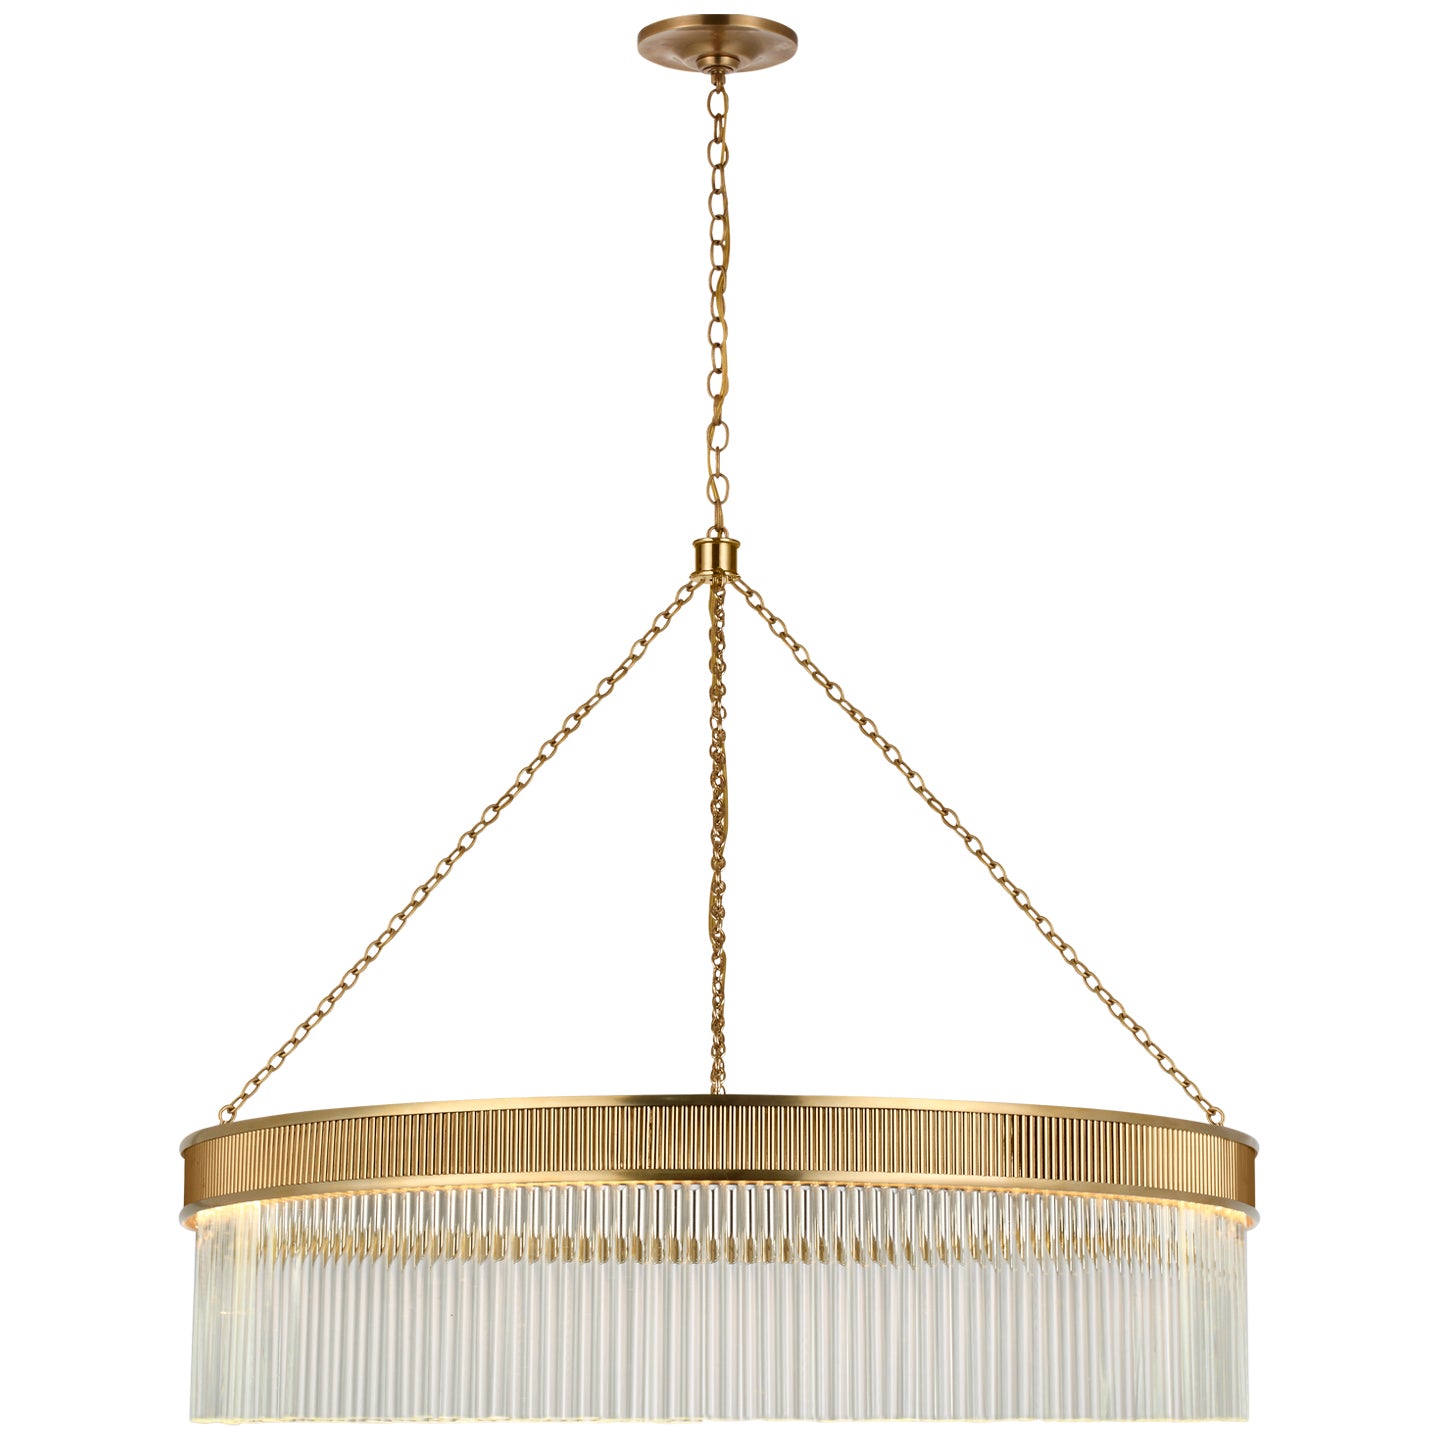 Load image into Gallery viewer, Visual Comfort Signature - S 5172SB-CG - LED Chandelier - Menil - Soft Brass
